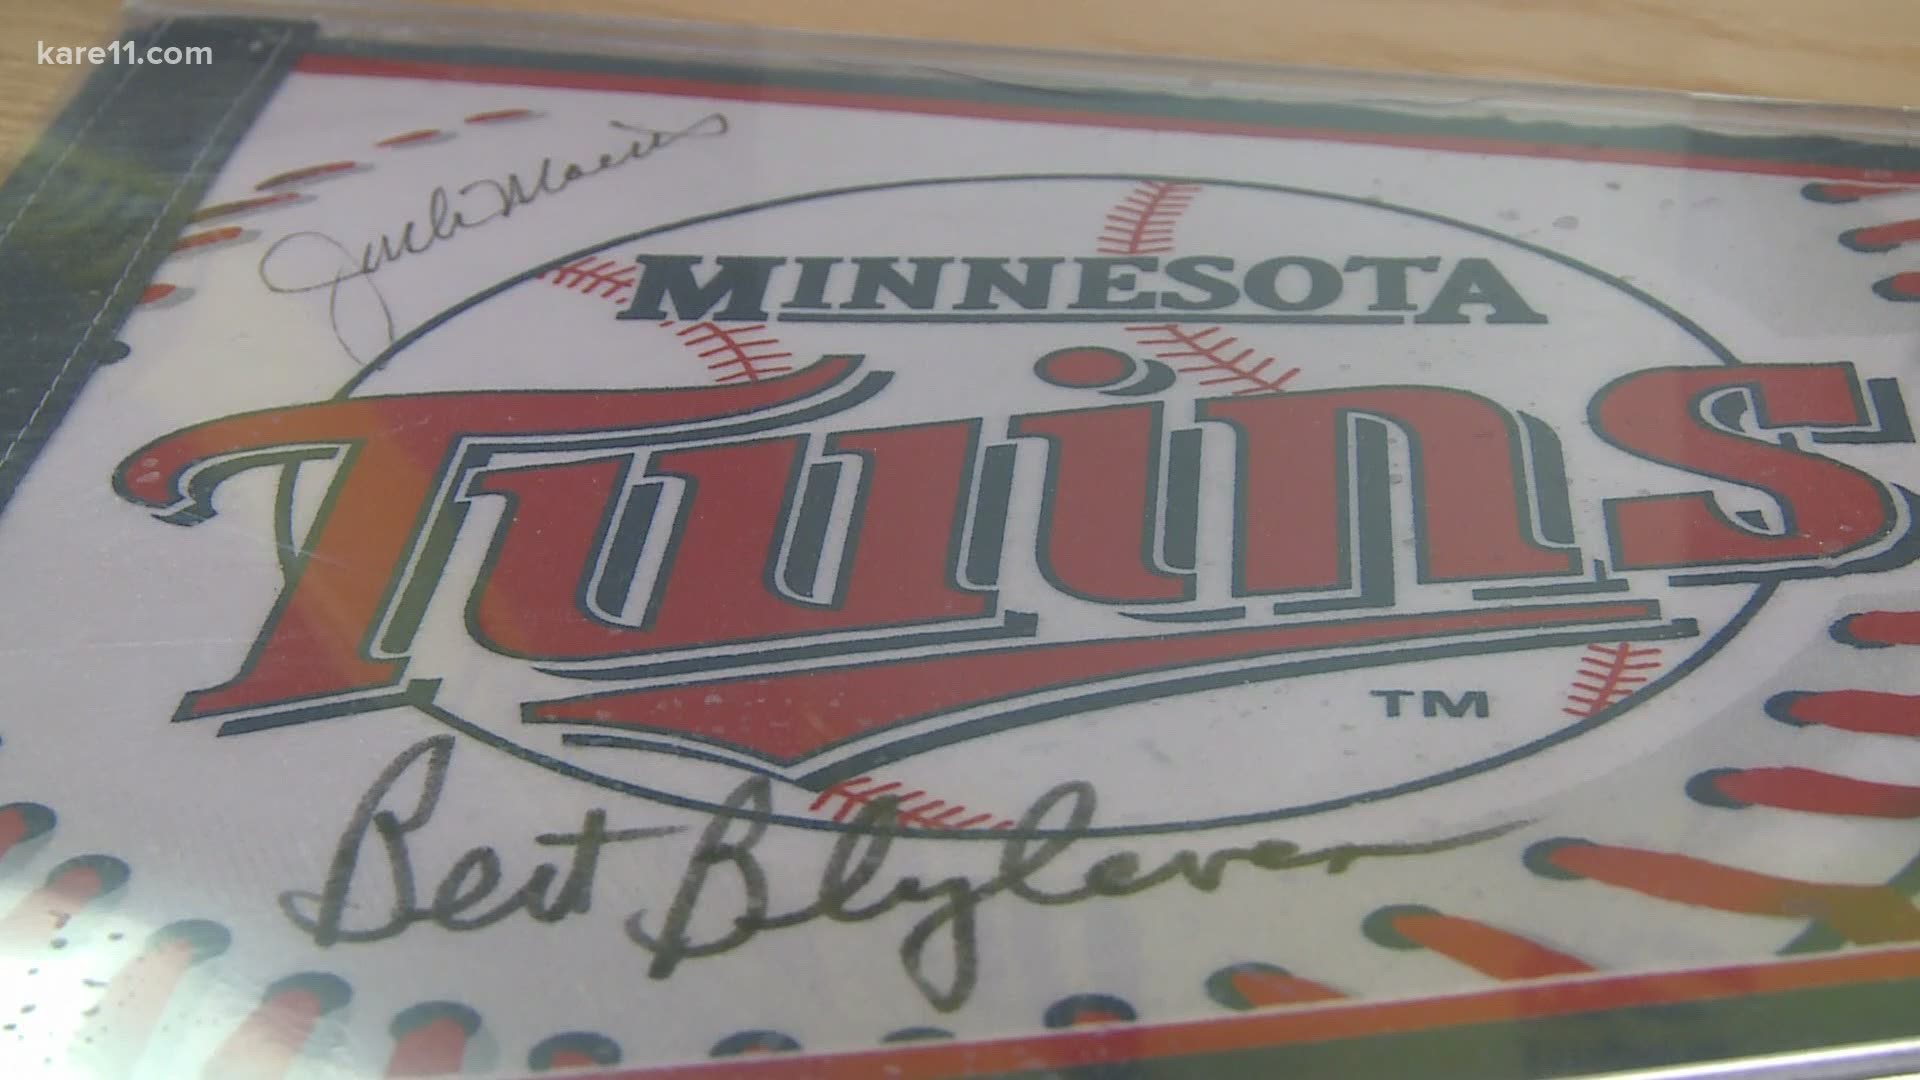 They can't go to the home opener in person this year, so Twins fans are doing the next best thing.